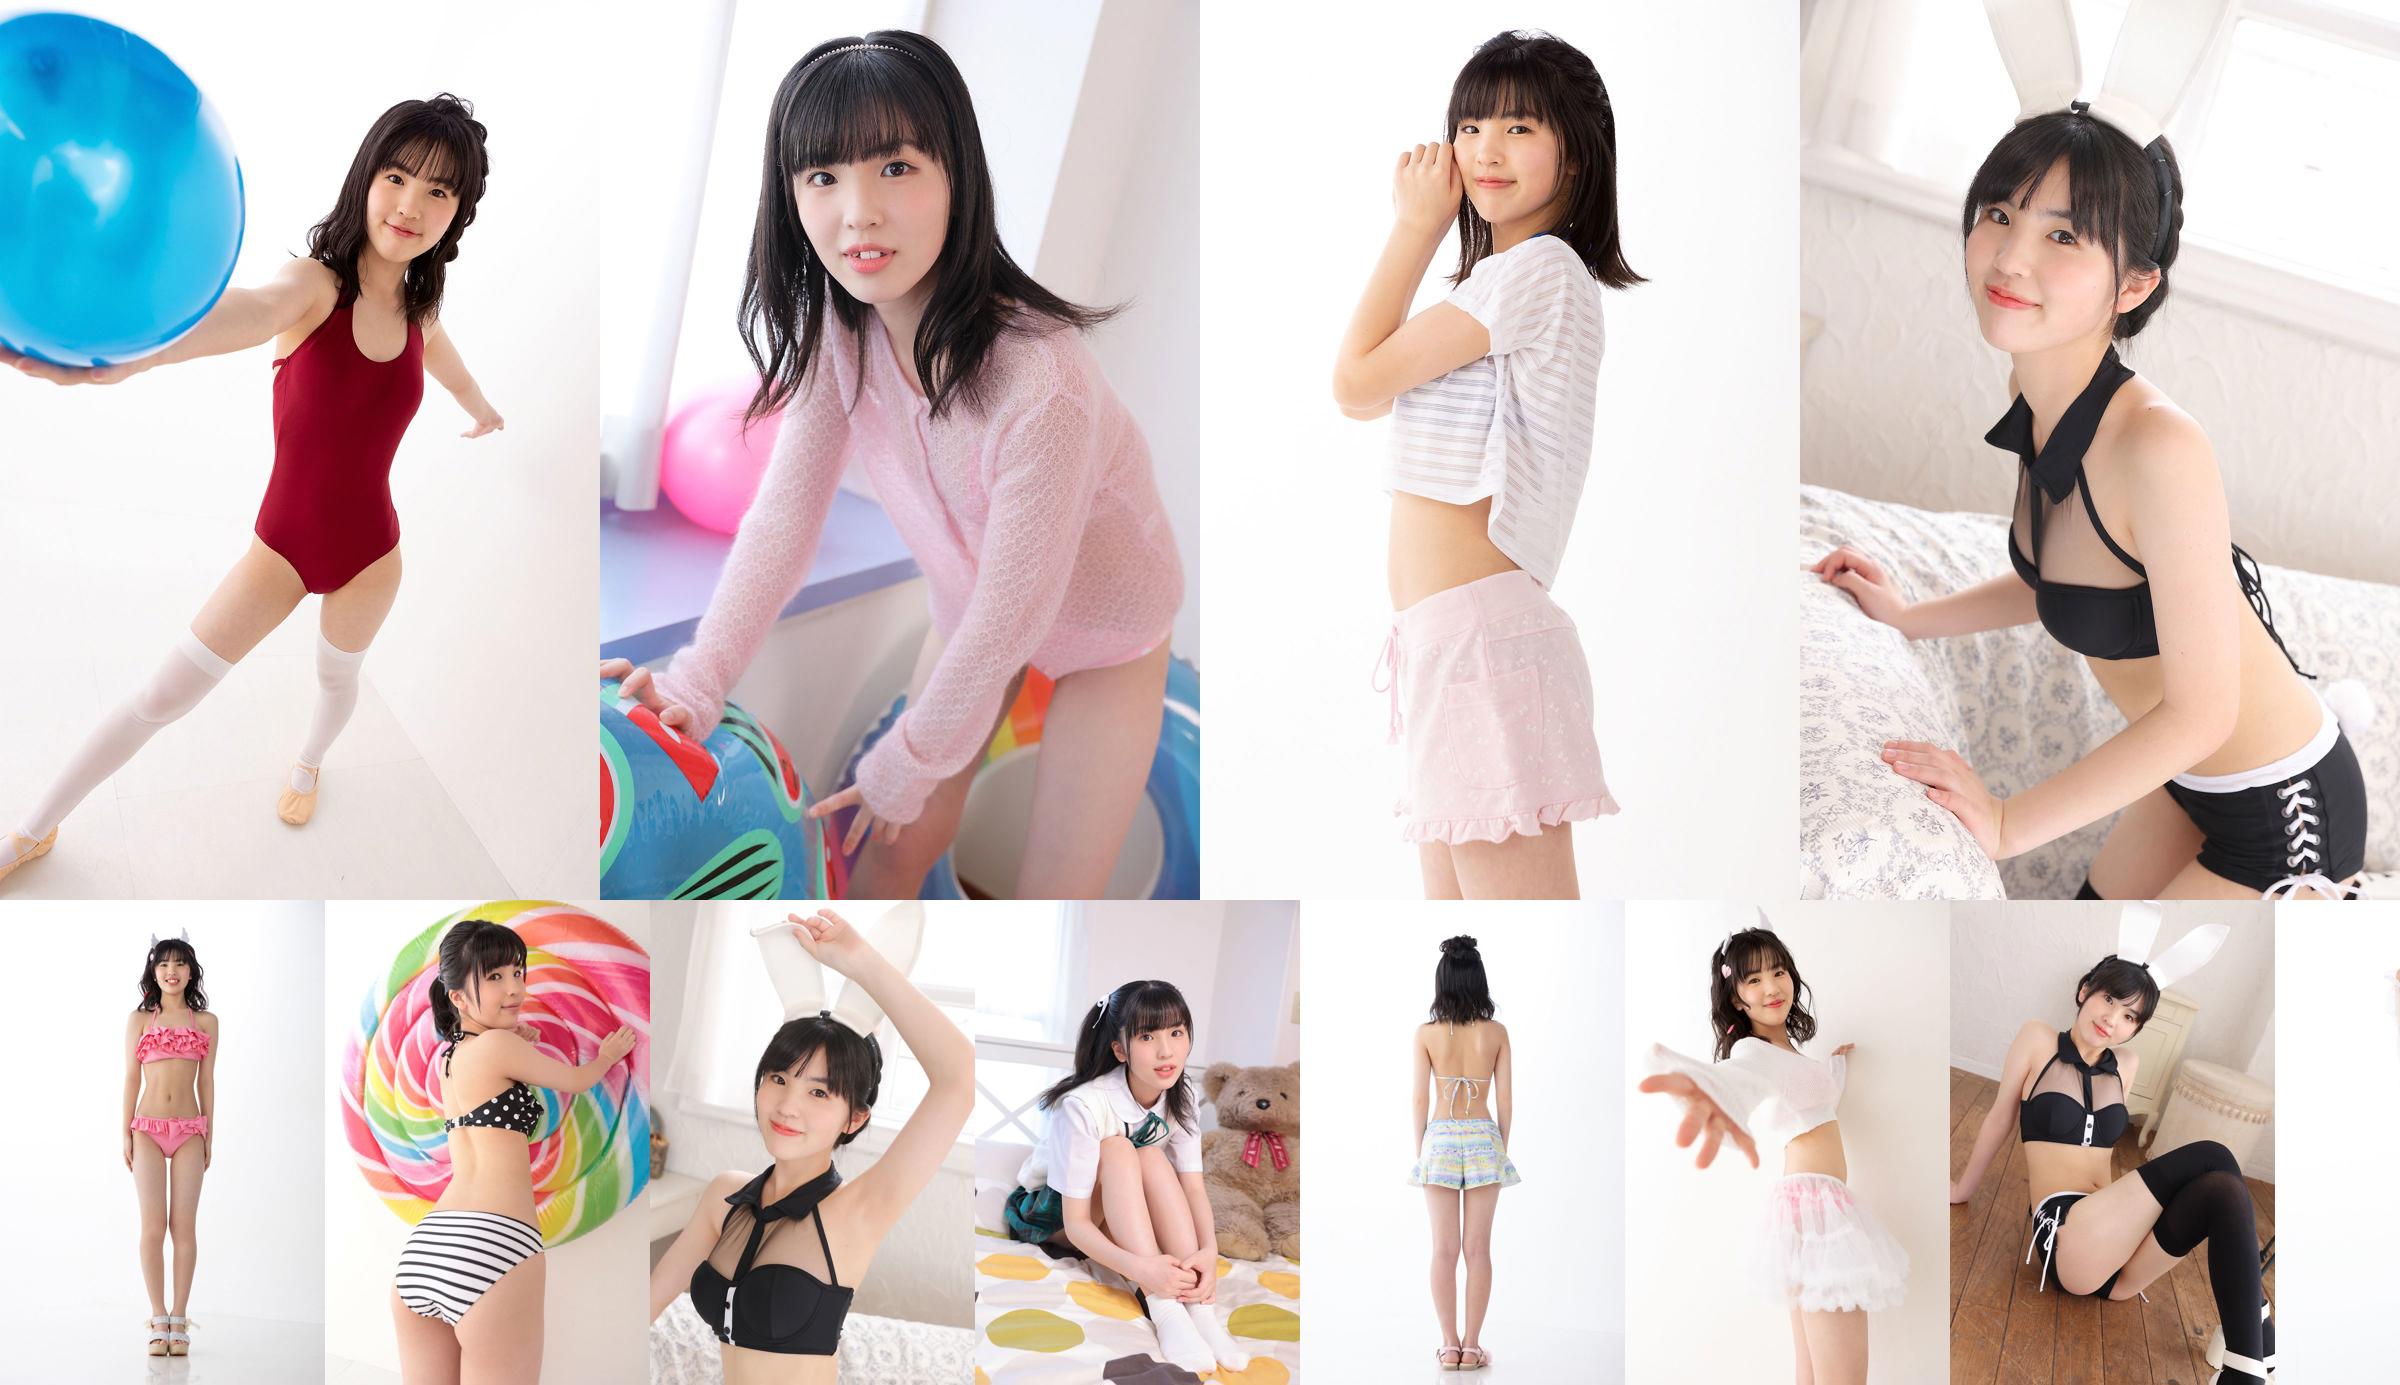 [Minisuka.tv] Ami Manabe 覞辺あみ - Fresh-idol Gallery 84 No.c2d00d Page 1